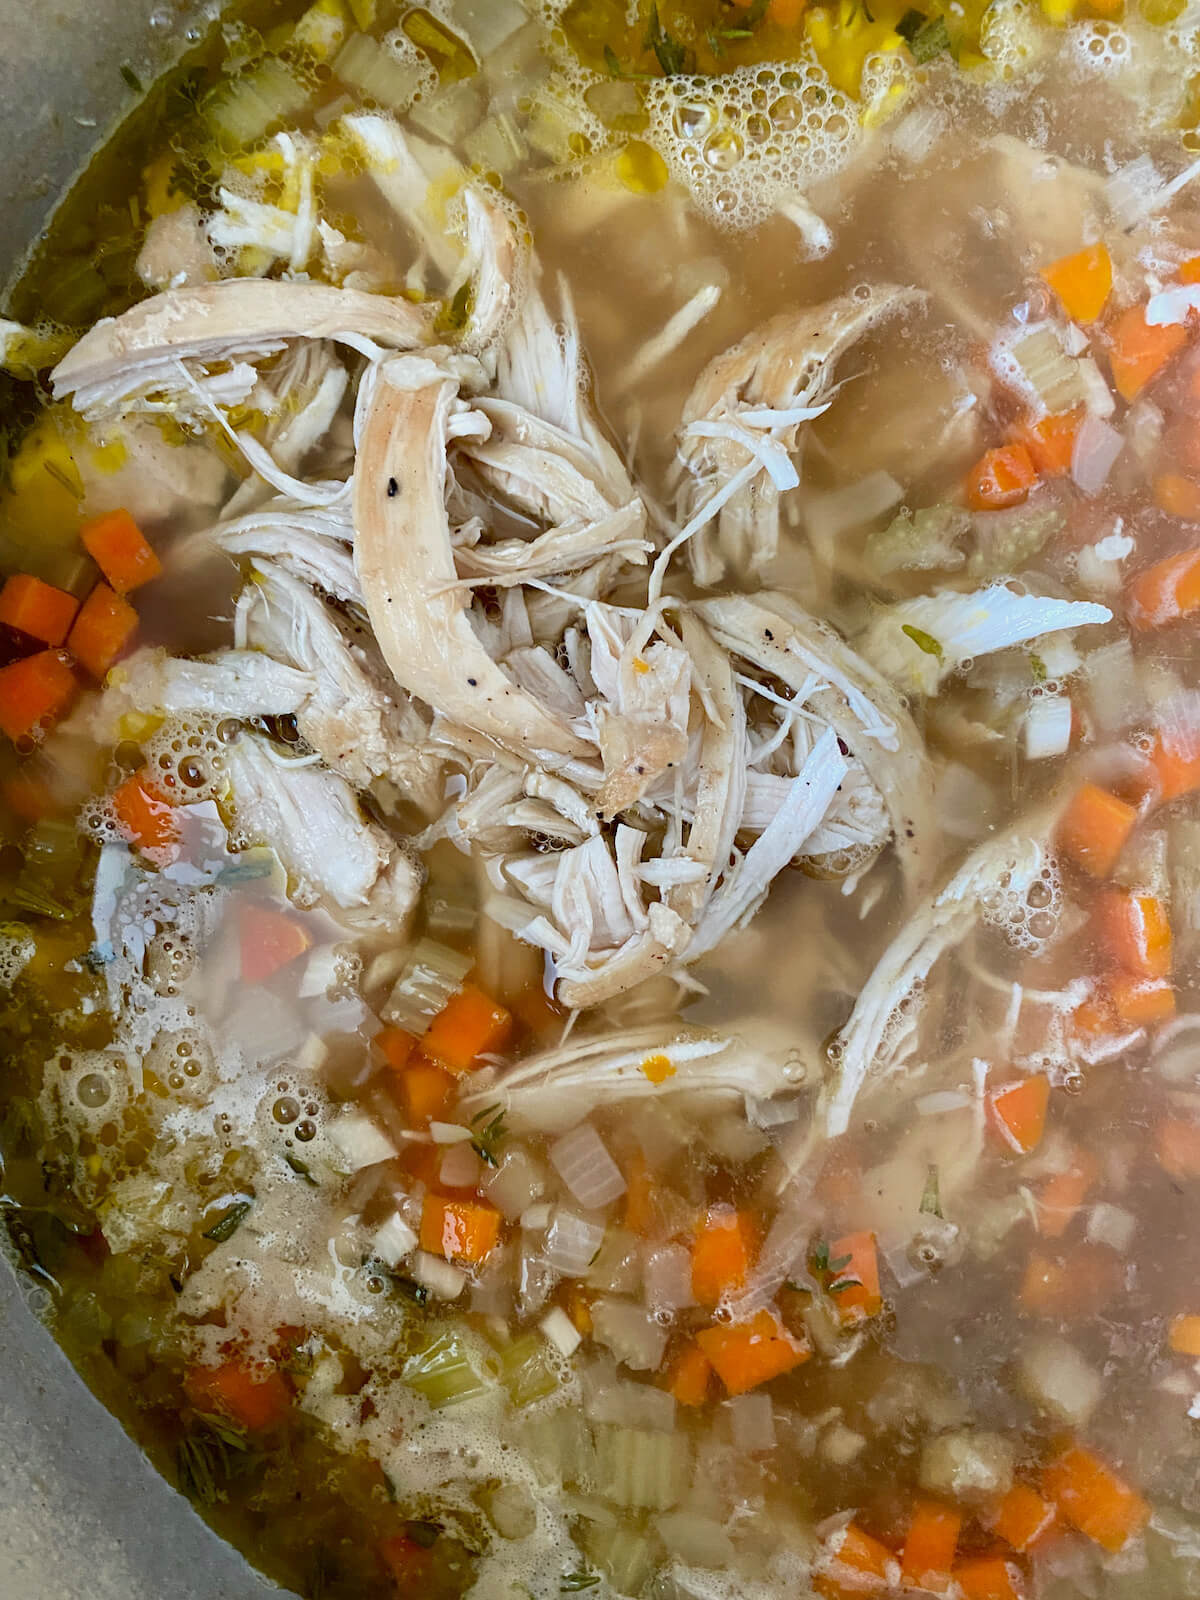 Shredded chicken breast added to the Dutch oven chicken noodle soup.